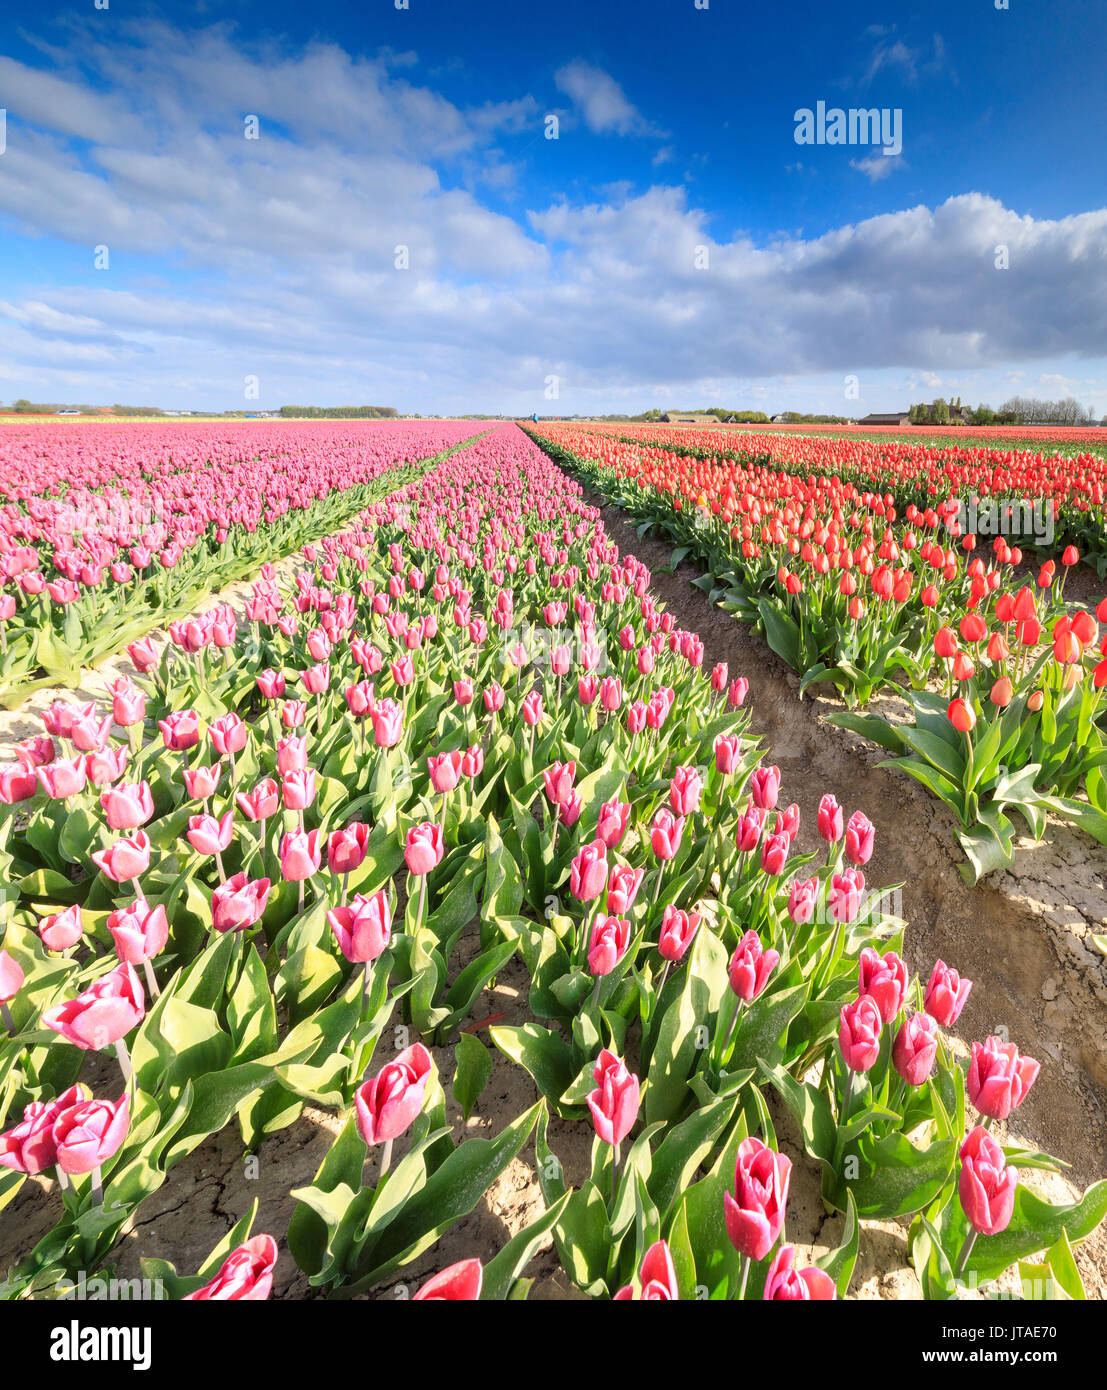 Panorama of multicolored tulips during spring bloom, Oude-Tonge, Goeree-Overflakkee, South Holland, The Netherlands, Europe Stock Photo